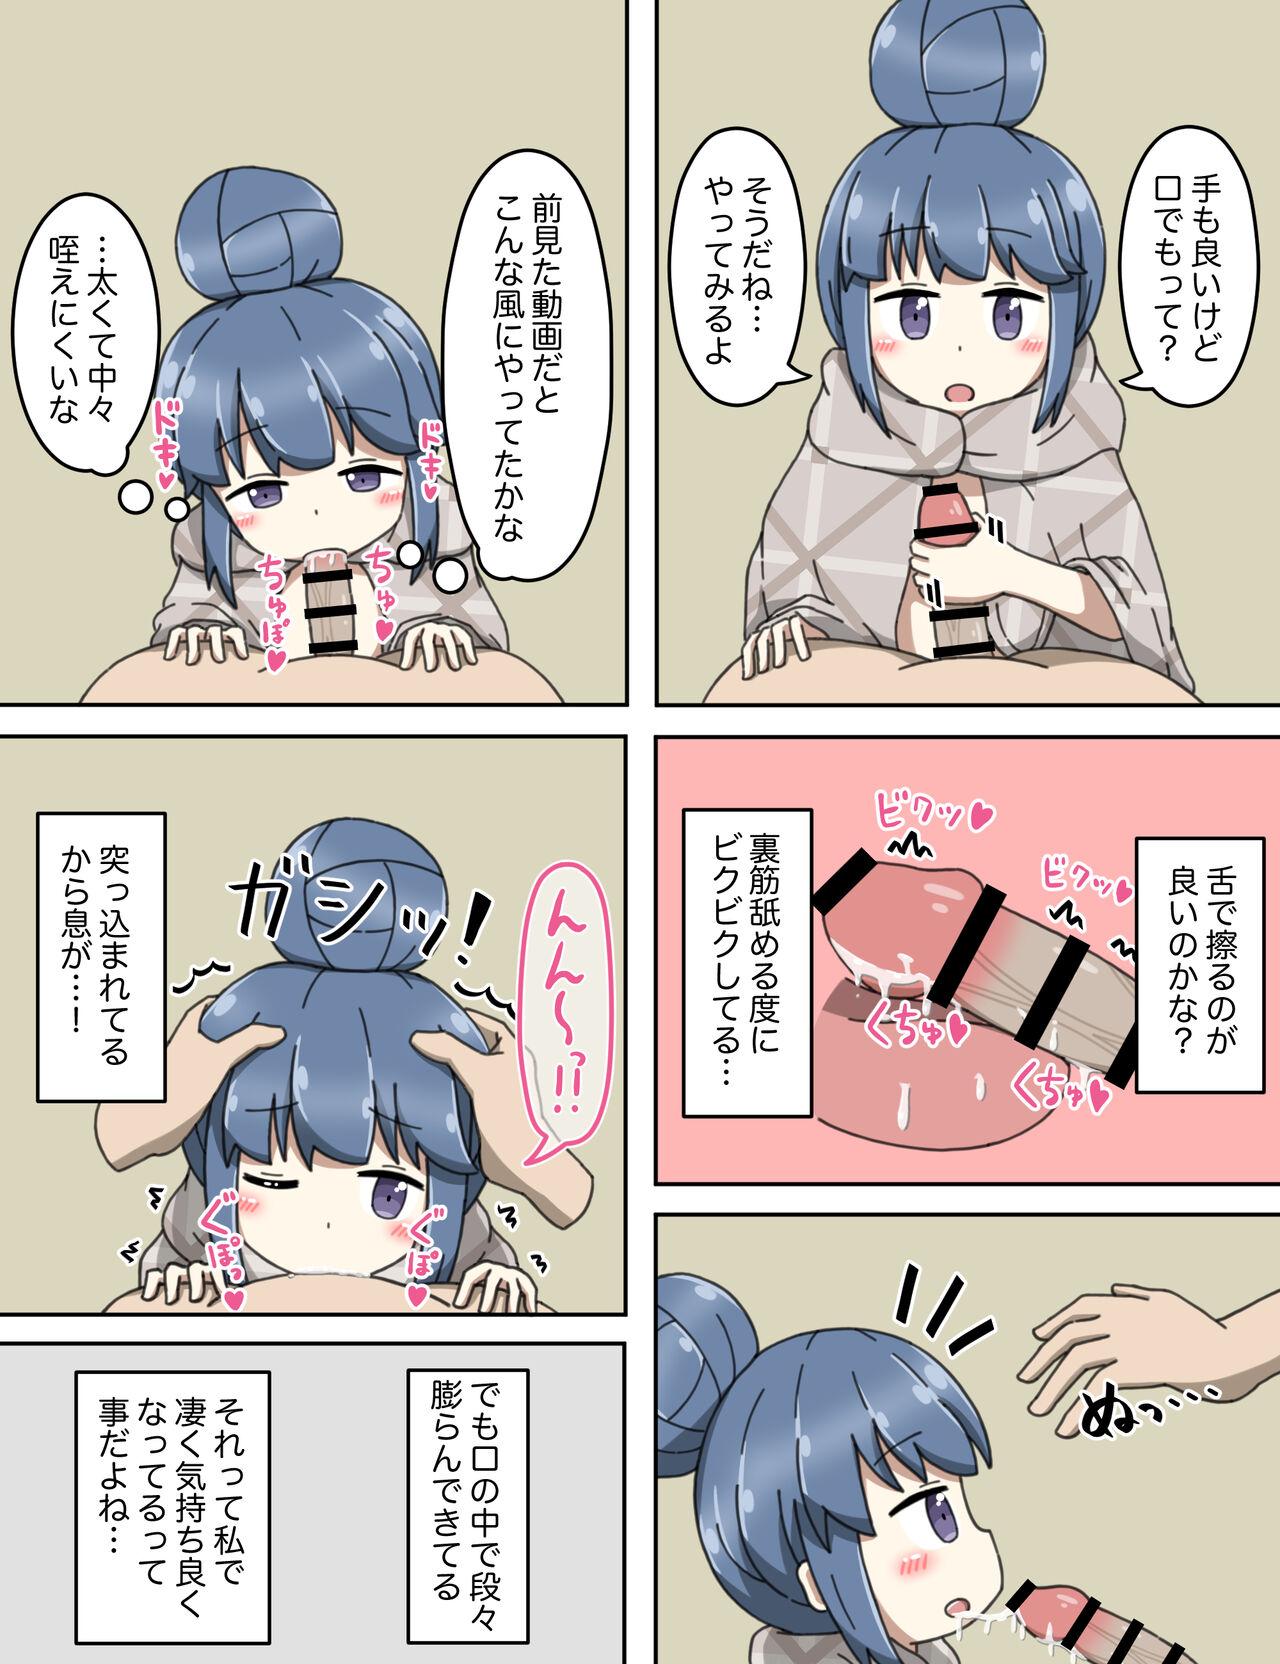 Strap On しまリンのうらバイト - Yuru camp | laid-back camp Toes - Page 9